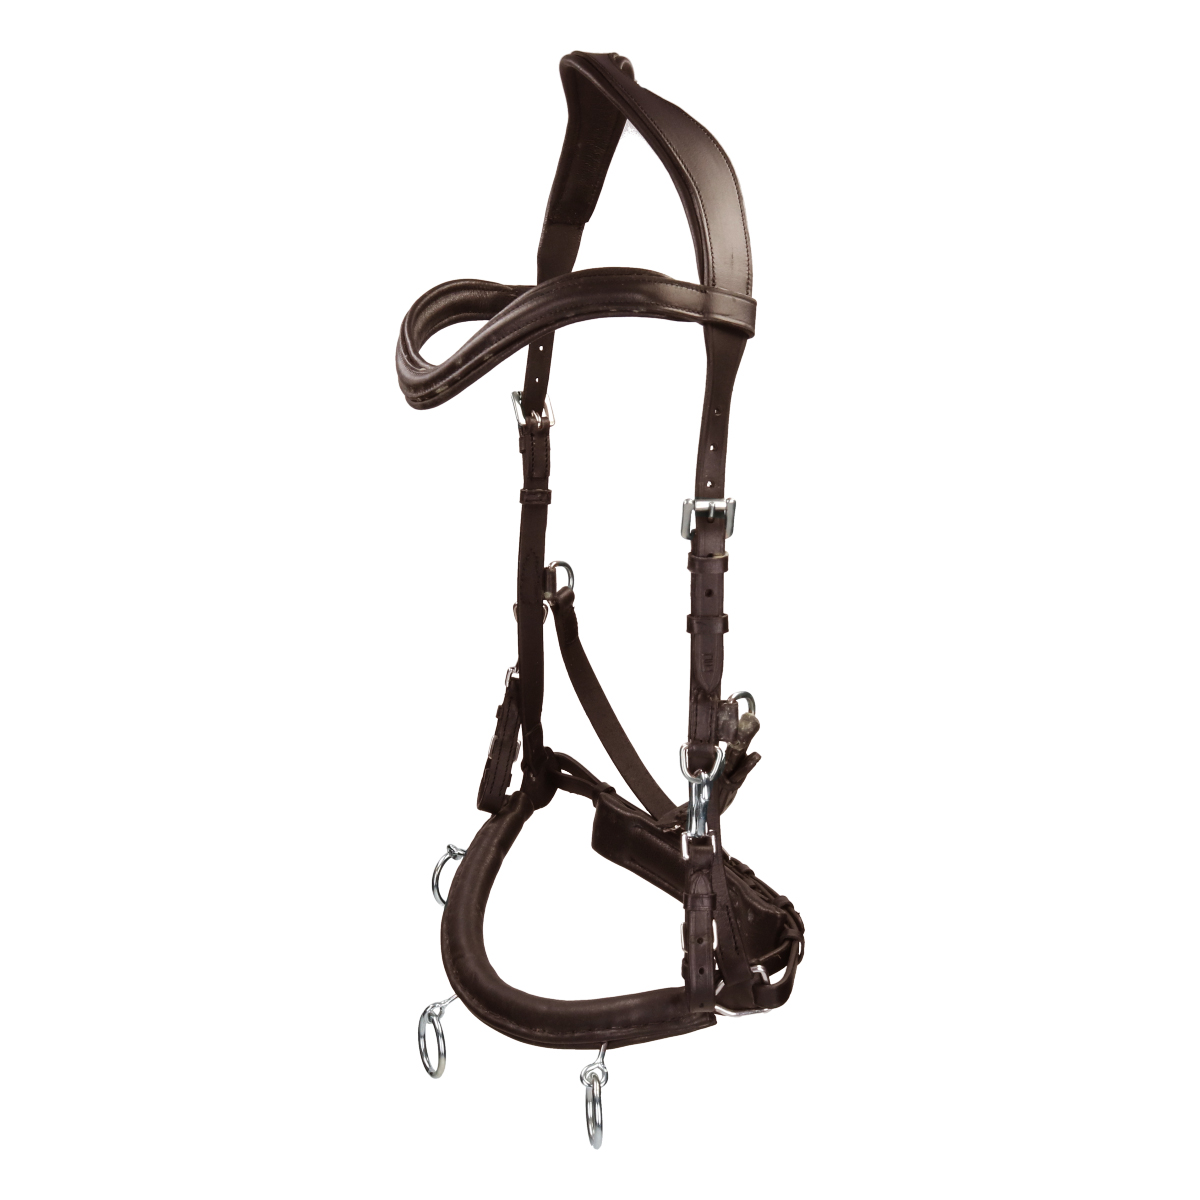 Leather and Rope Horse Halter by Kentucky Horsewear - Four Star